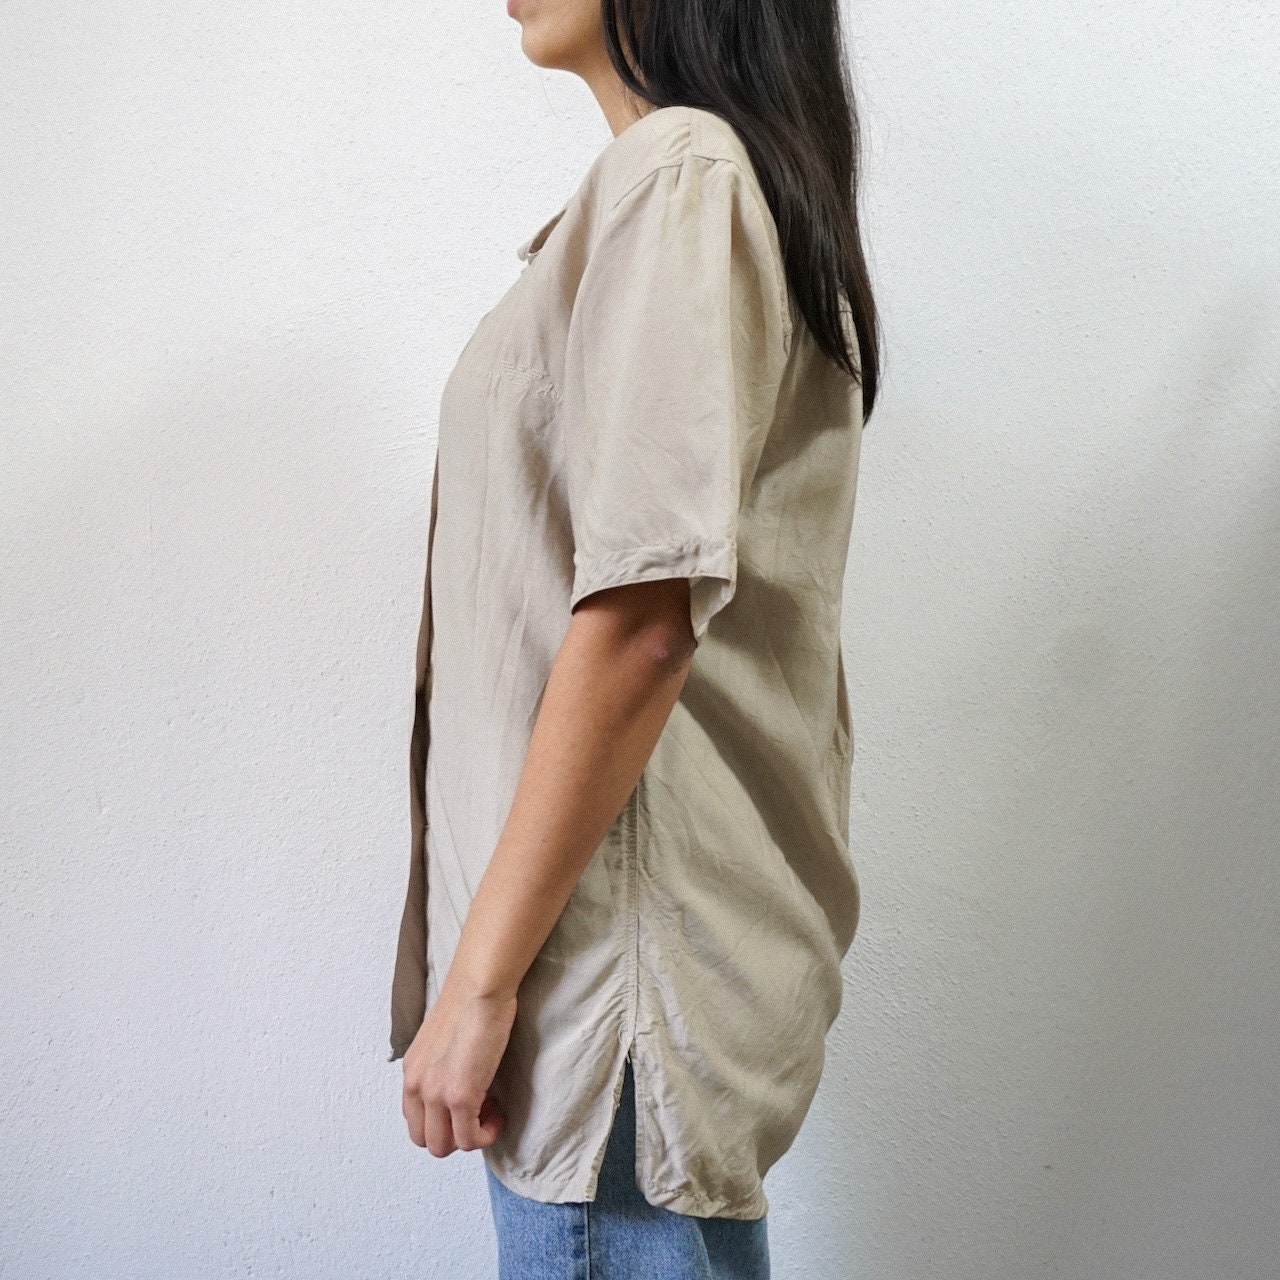 Vintage Emporio Armani Shirt Size L short sleeved button up shirt collared top beige shirt